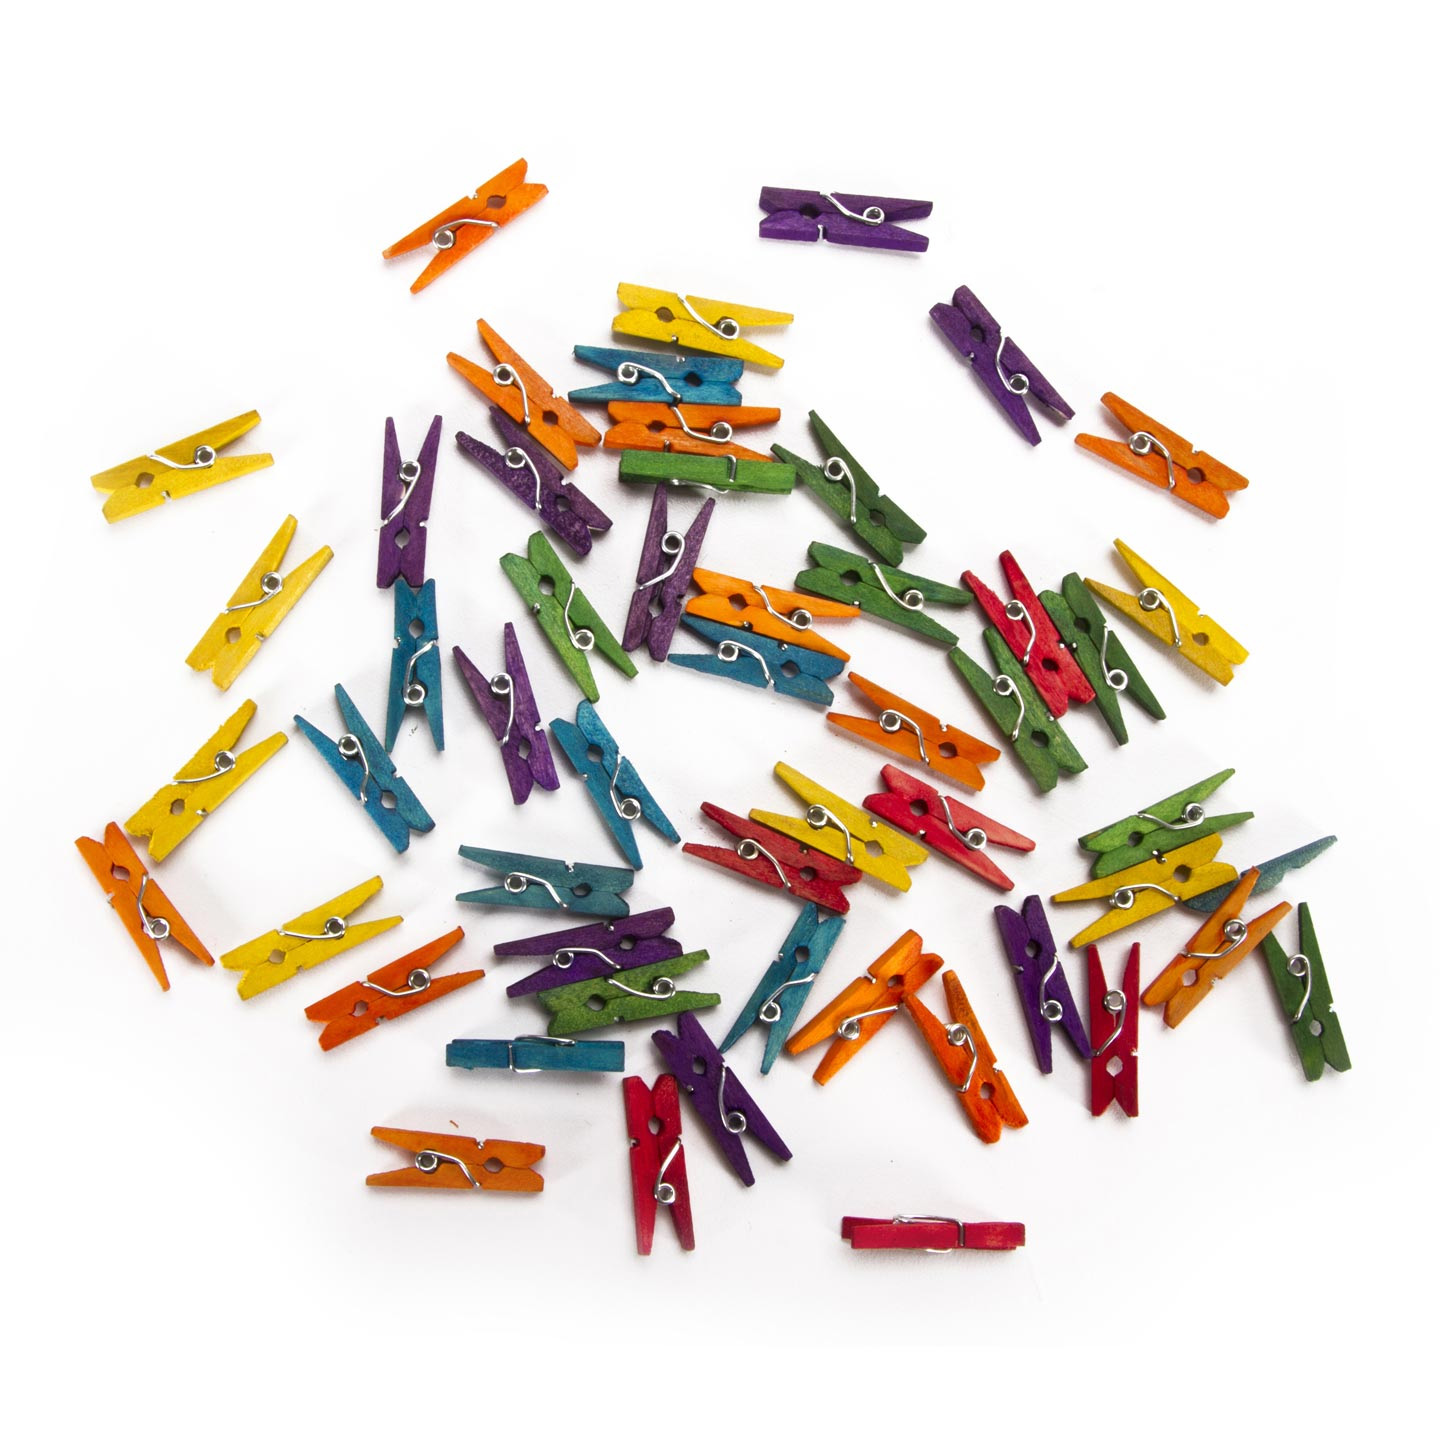 Colored Mini Clothespins - Colored Wooden Clothespins - Mini Wood Clothespins - Mini Clothespins for Crafts